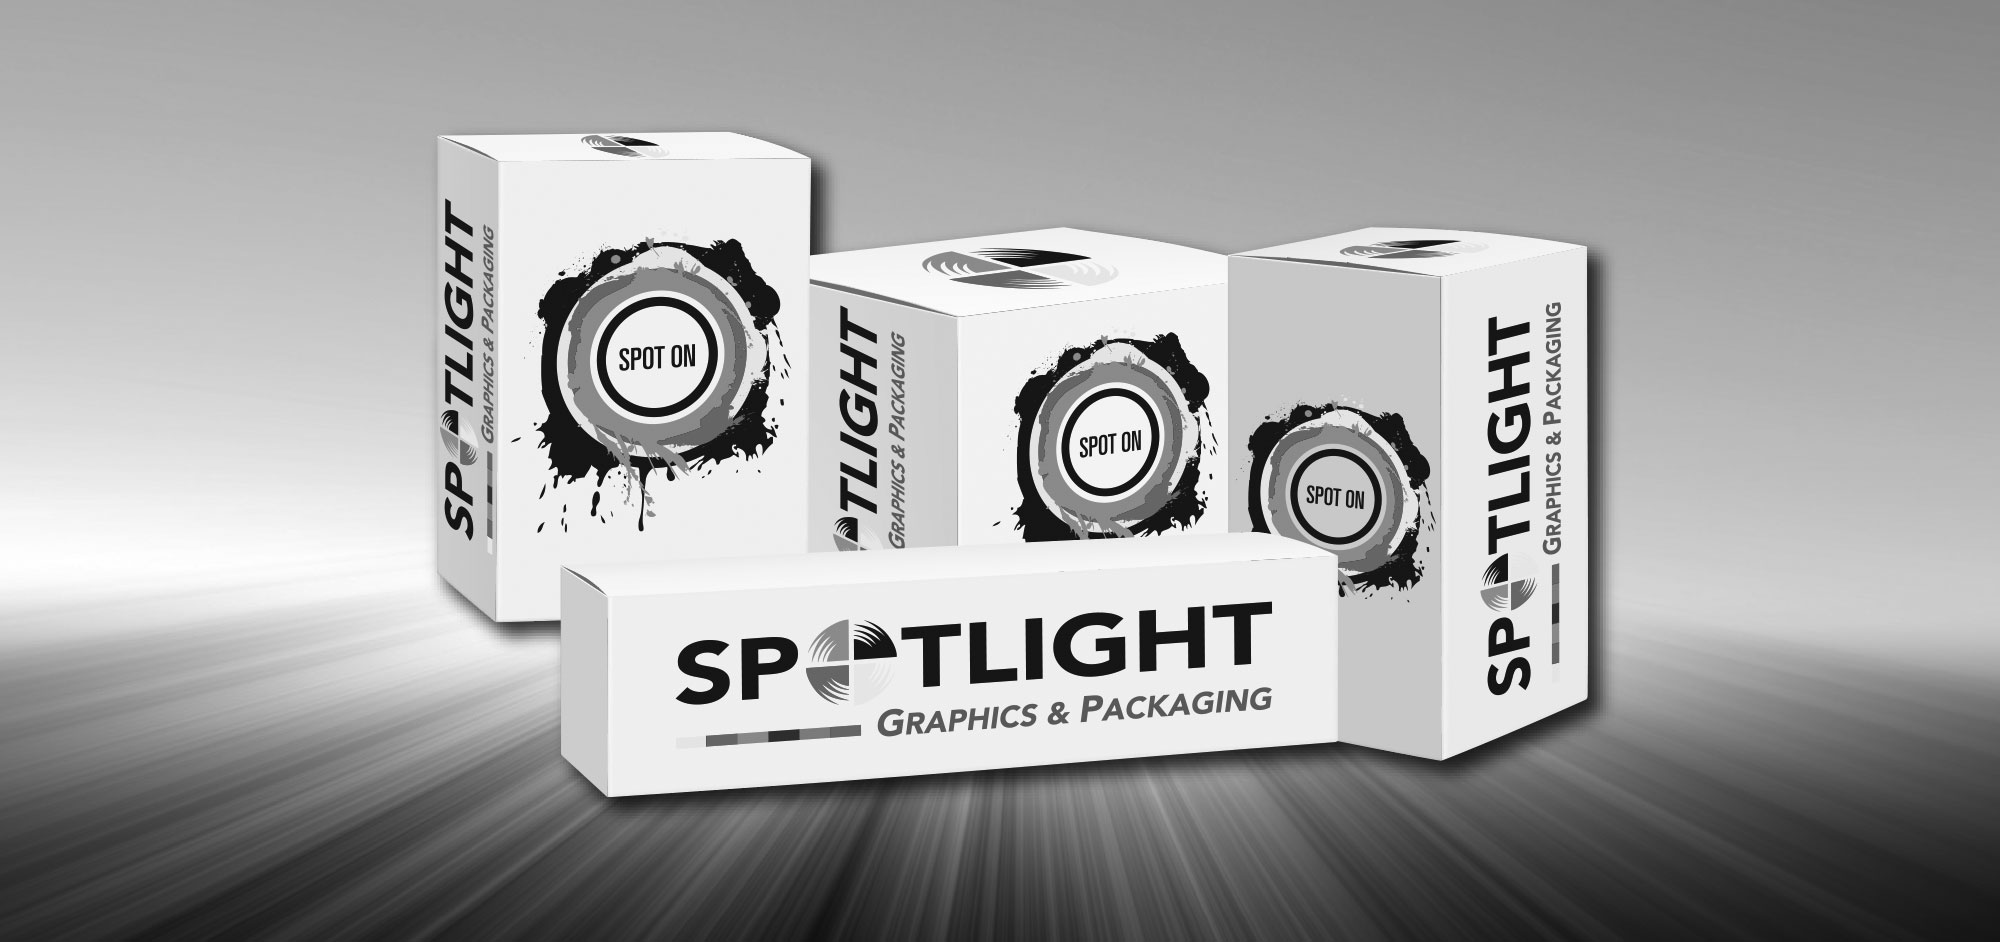 Seeding Kit Packaging - Fine Commercial Printing, NYC, NJ, CT, Letterpress,  Engraving, Packaging by DATAGRAPHIC